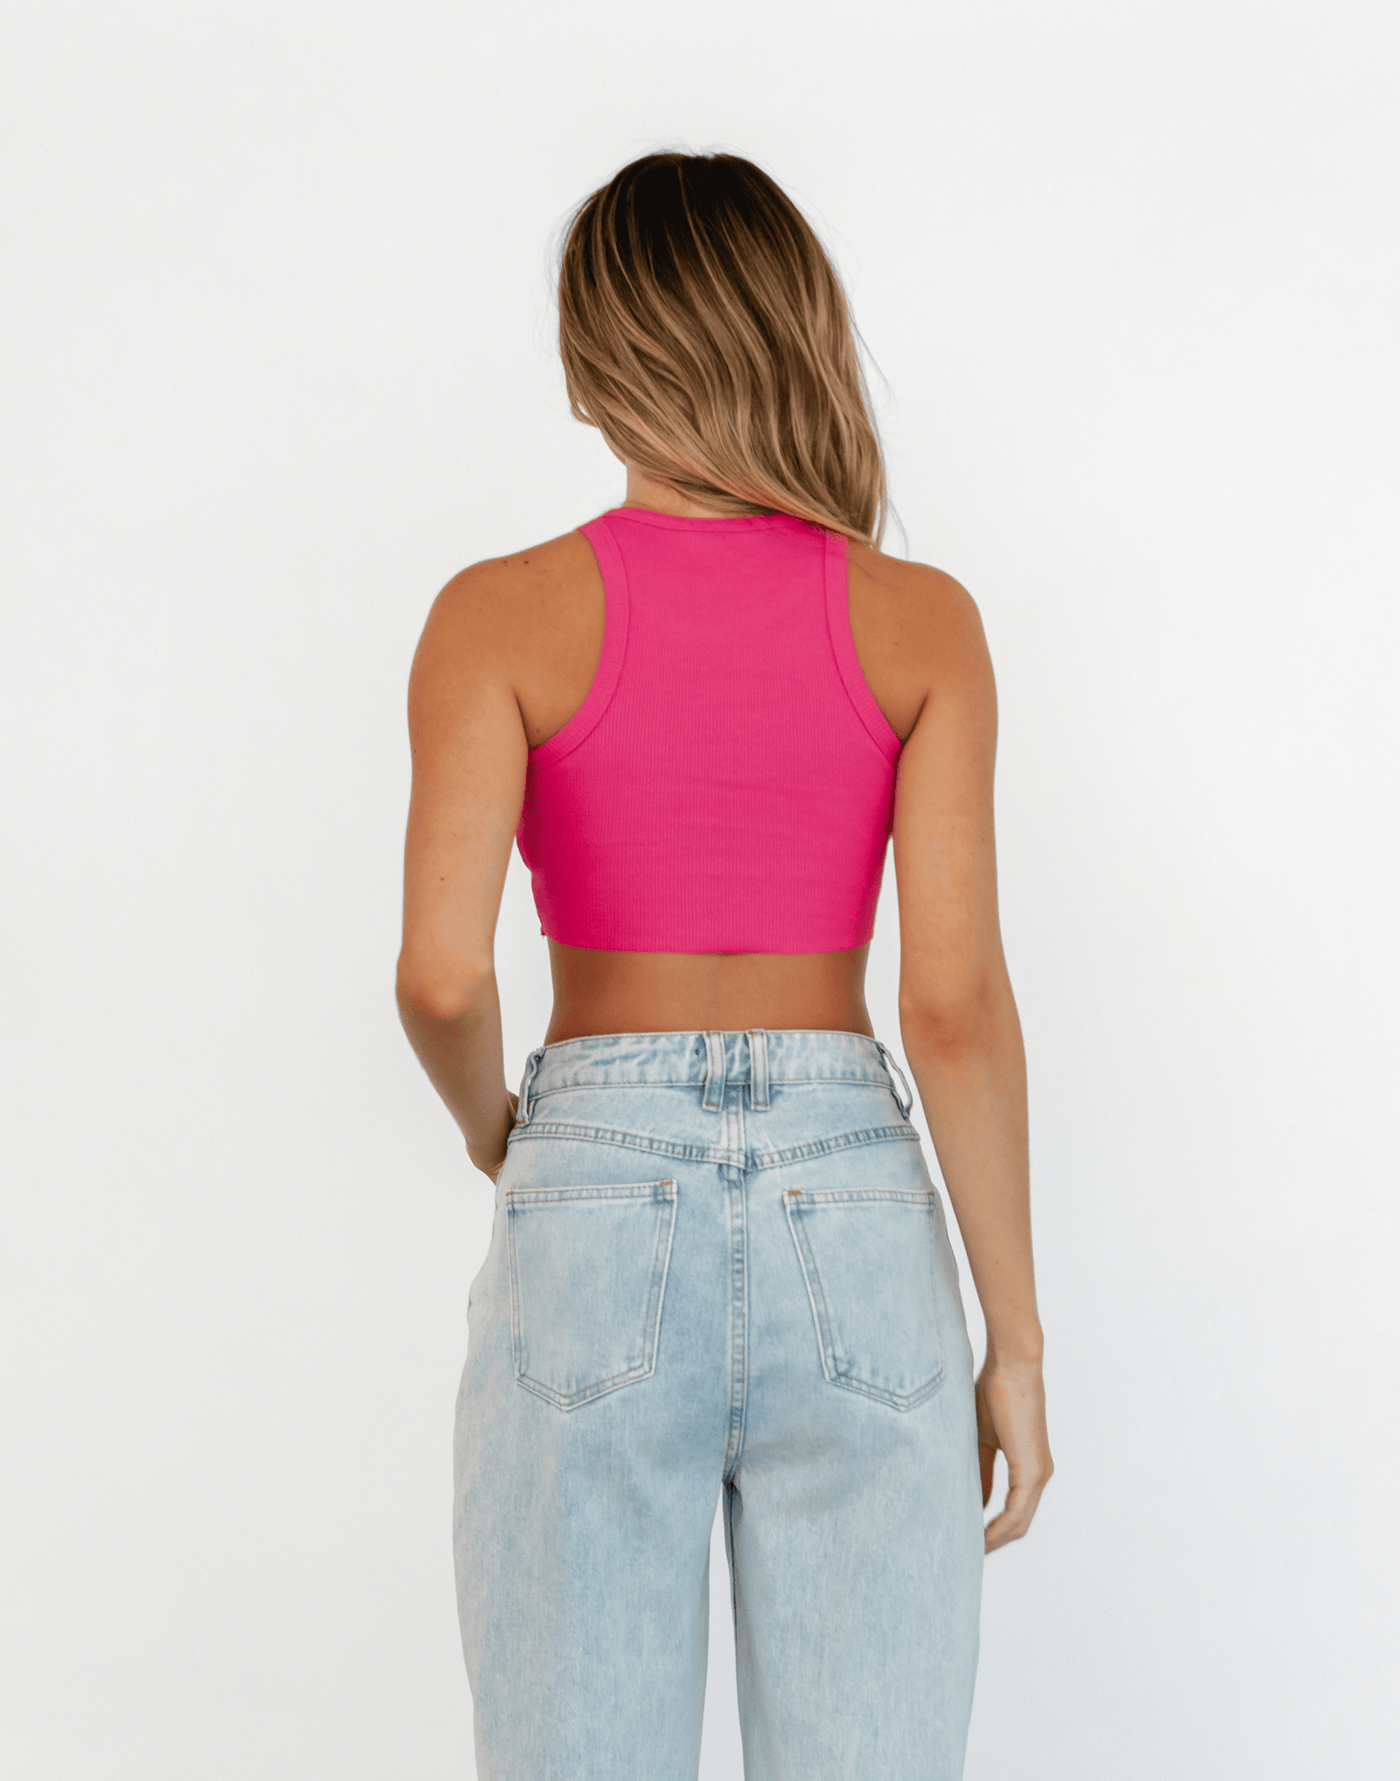 Emerie Tank Top (Hot Pink) - Basic Ribbed Tank Top - Women's Top - Charcoal Clothing